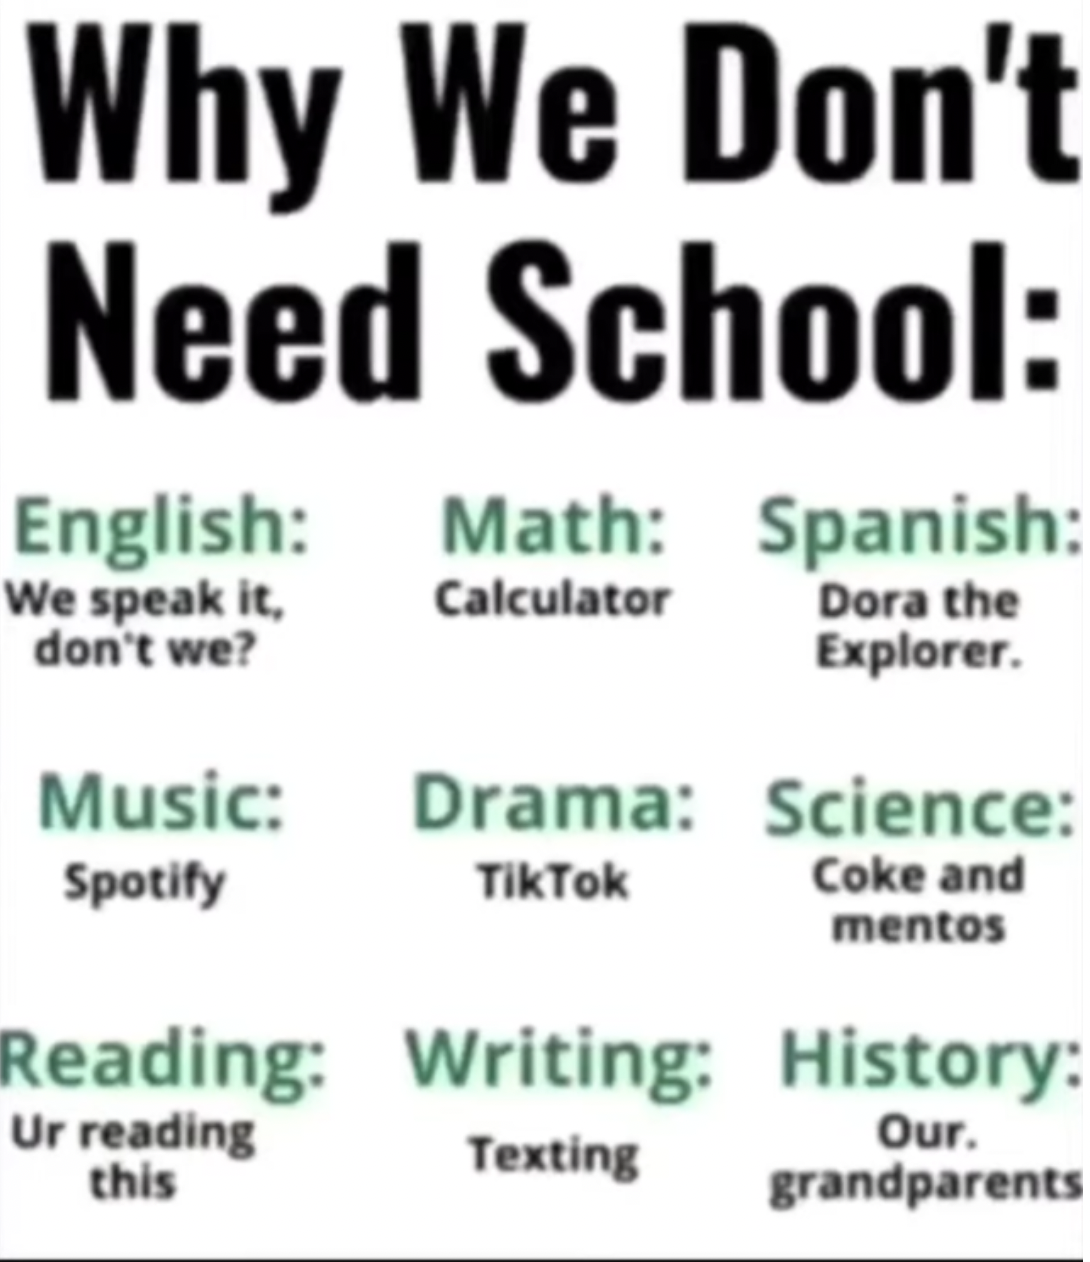 Cringey Pics - Music - Why We Don't Need School English Math Spanish We speak it, don't we? Calculator Dora the Explorer. Music Spotify Drama Science TikTok Coke and mentos Reading Writing History Ur reading this Texting Our. grandparents